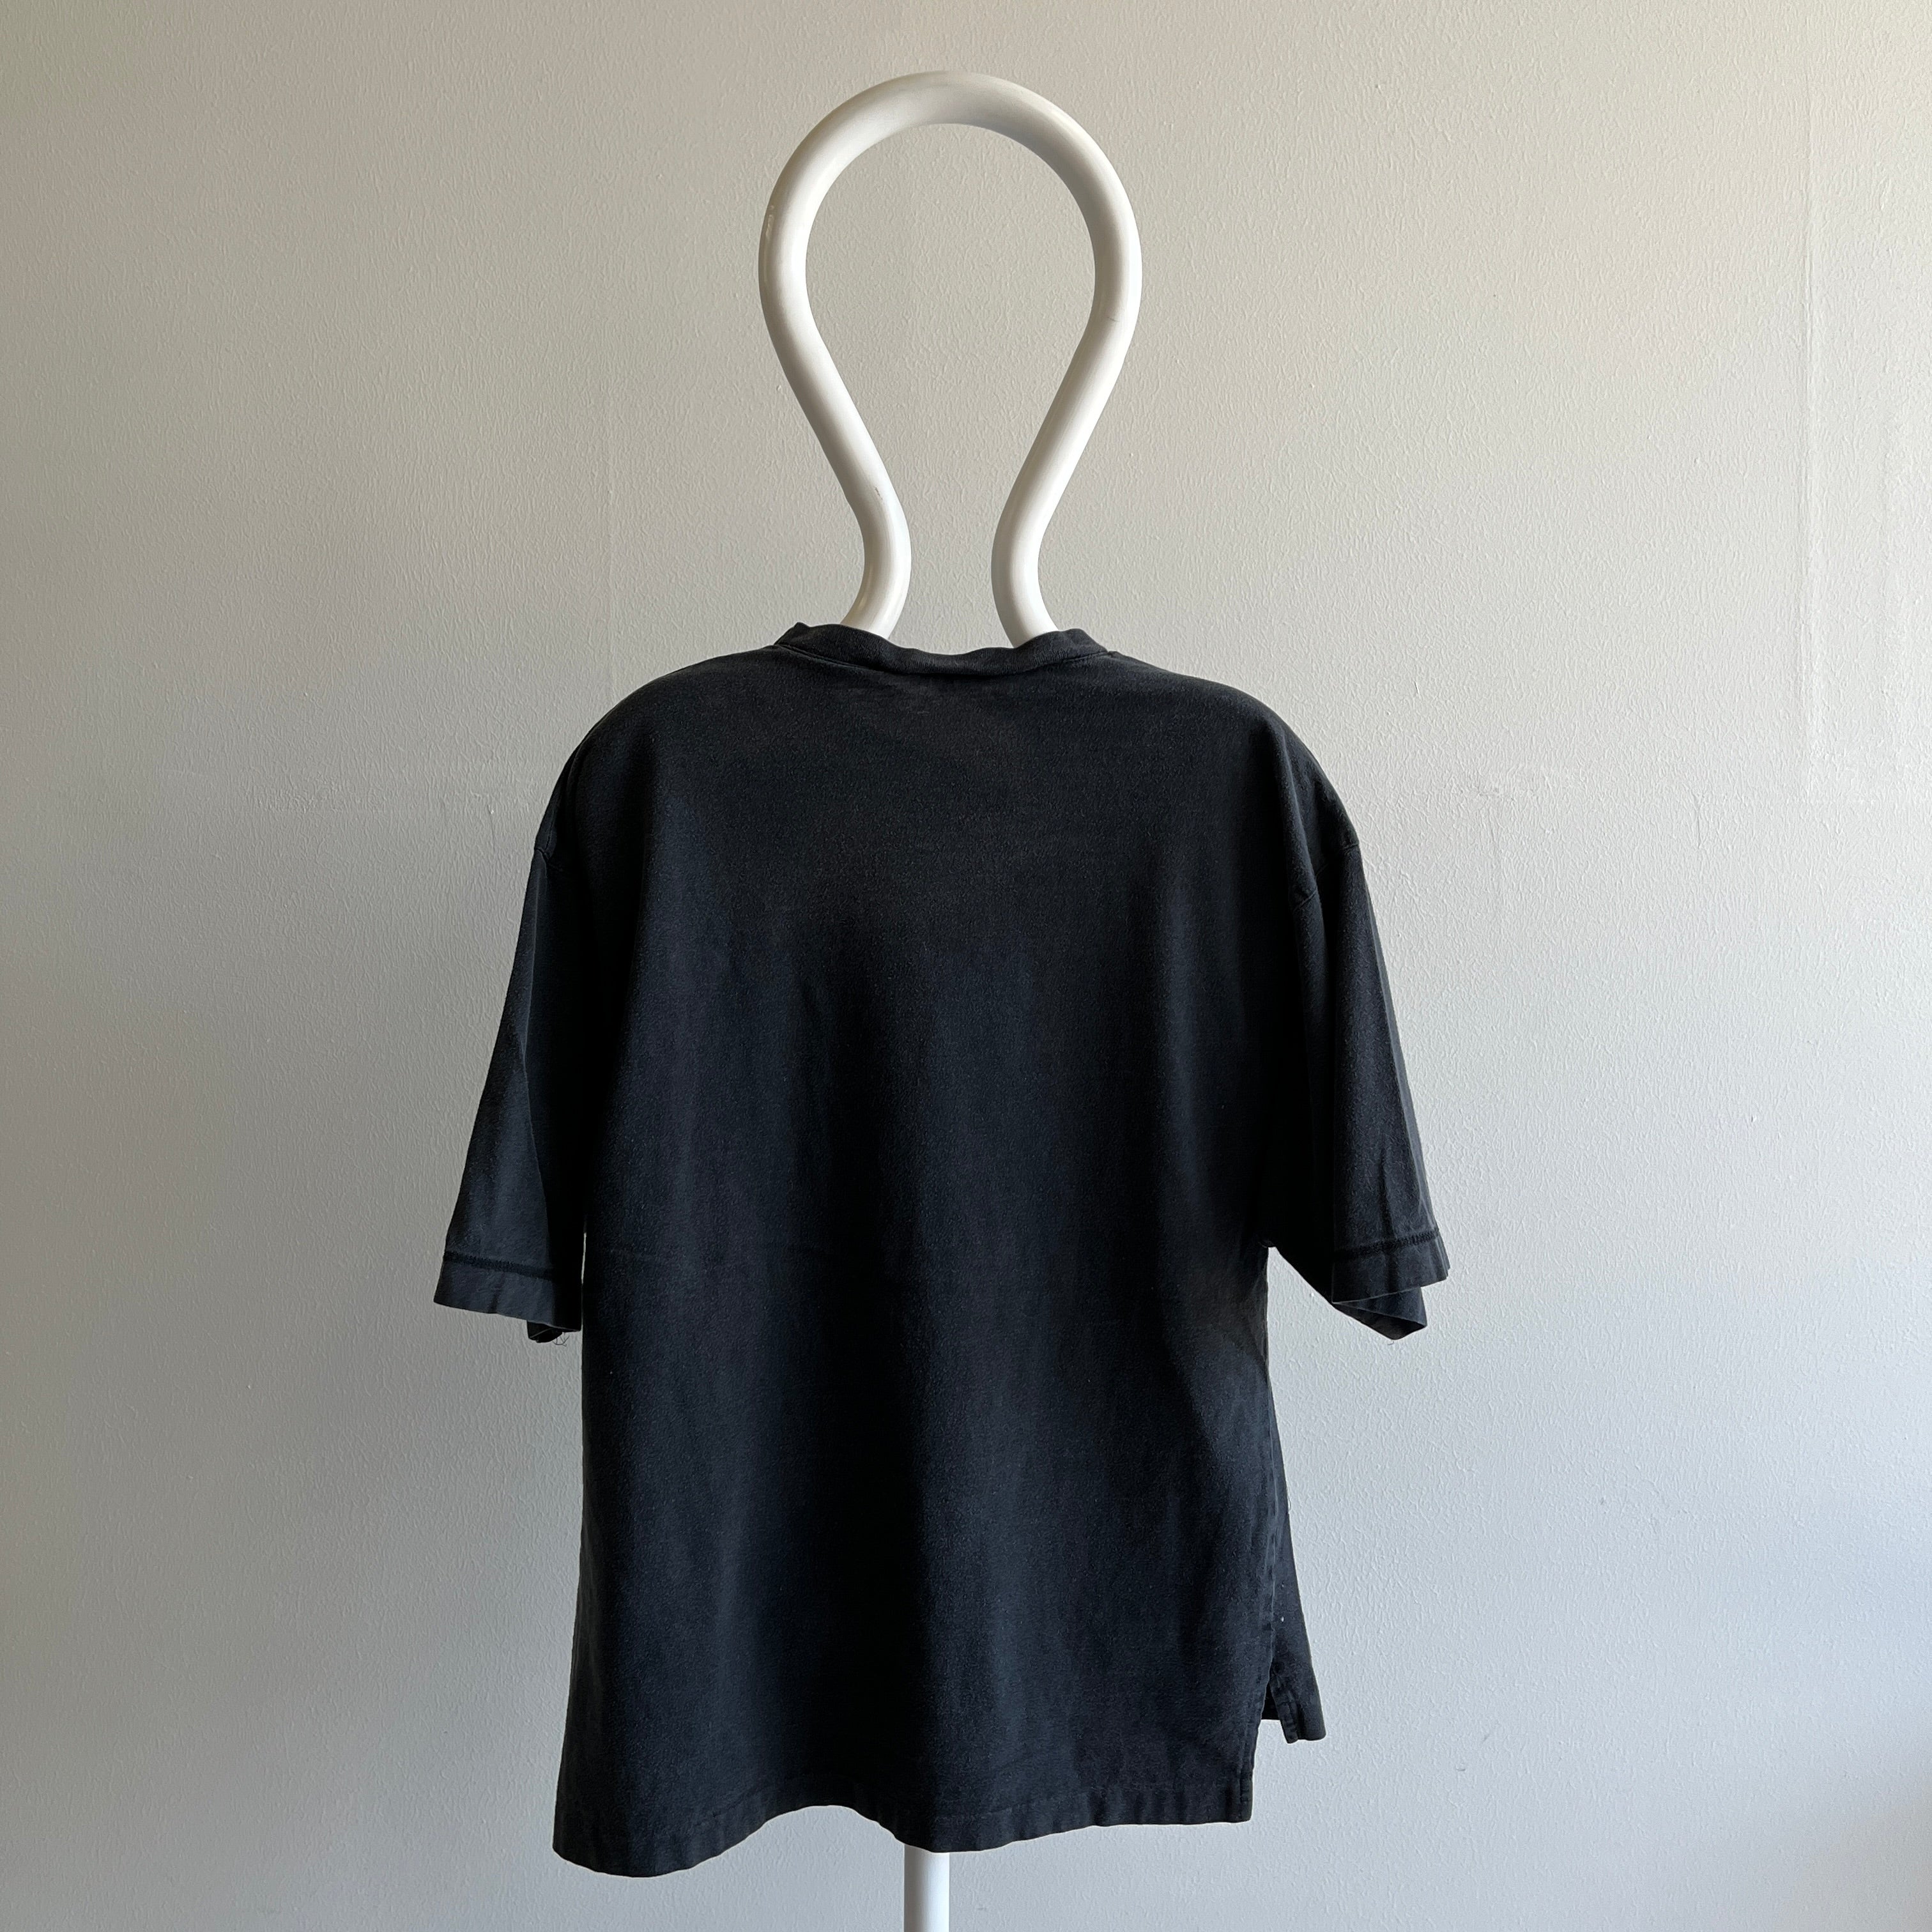 1990s Faded Cotton Pocket (with button!) Blank Black T-Shirt